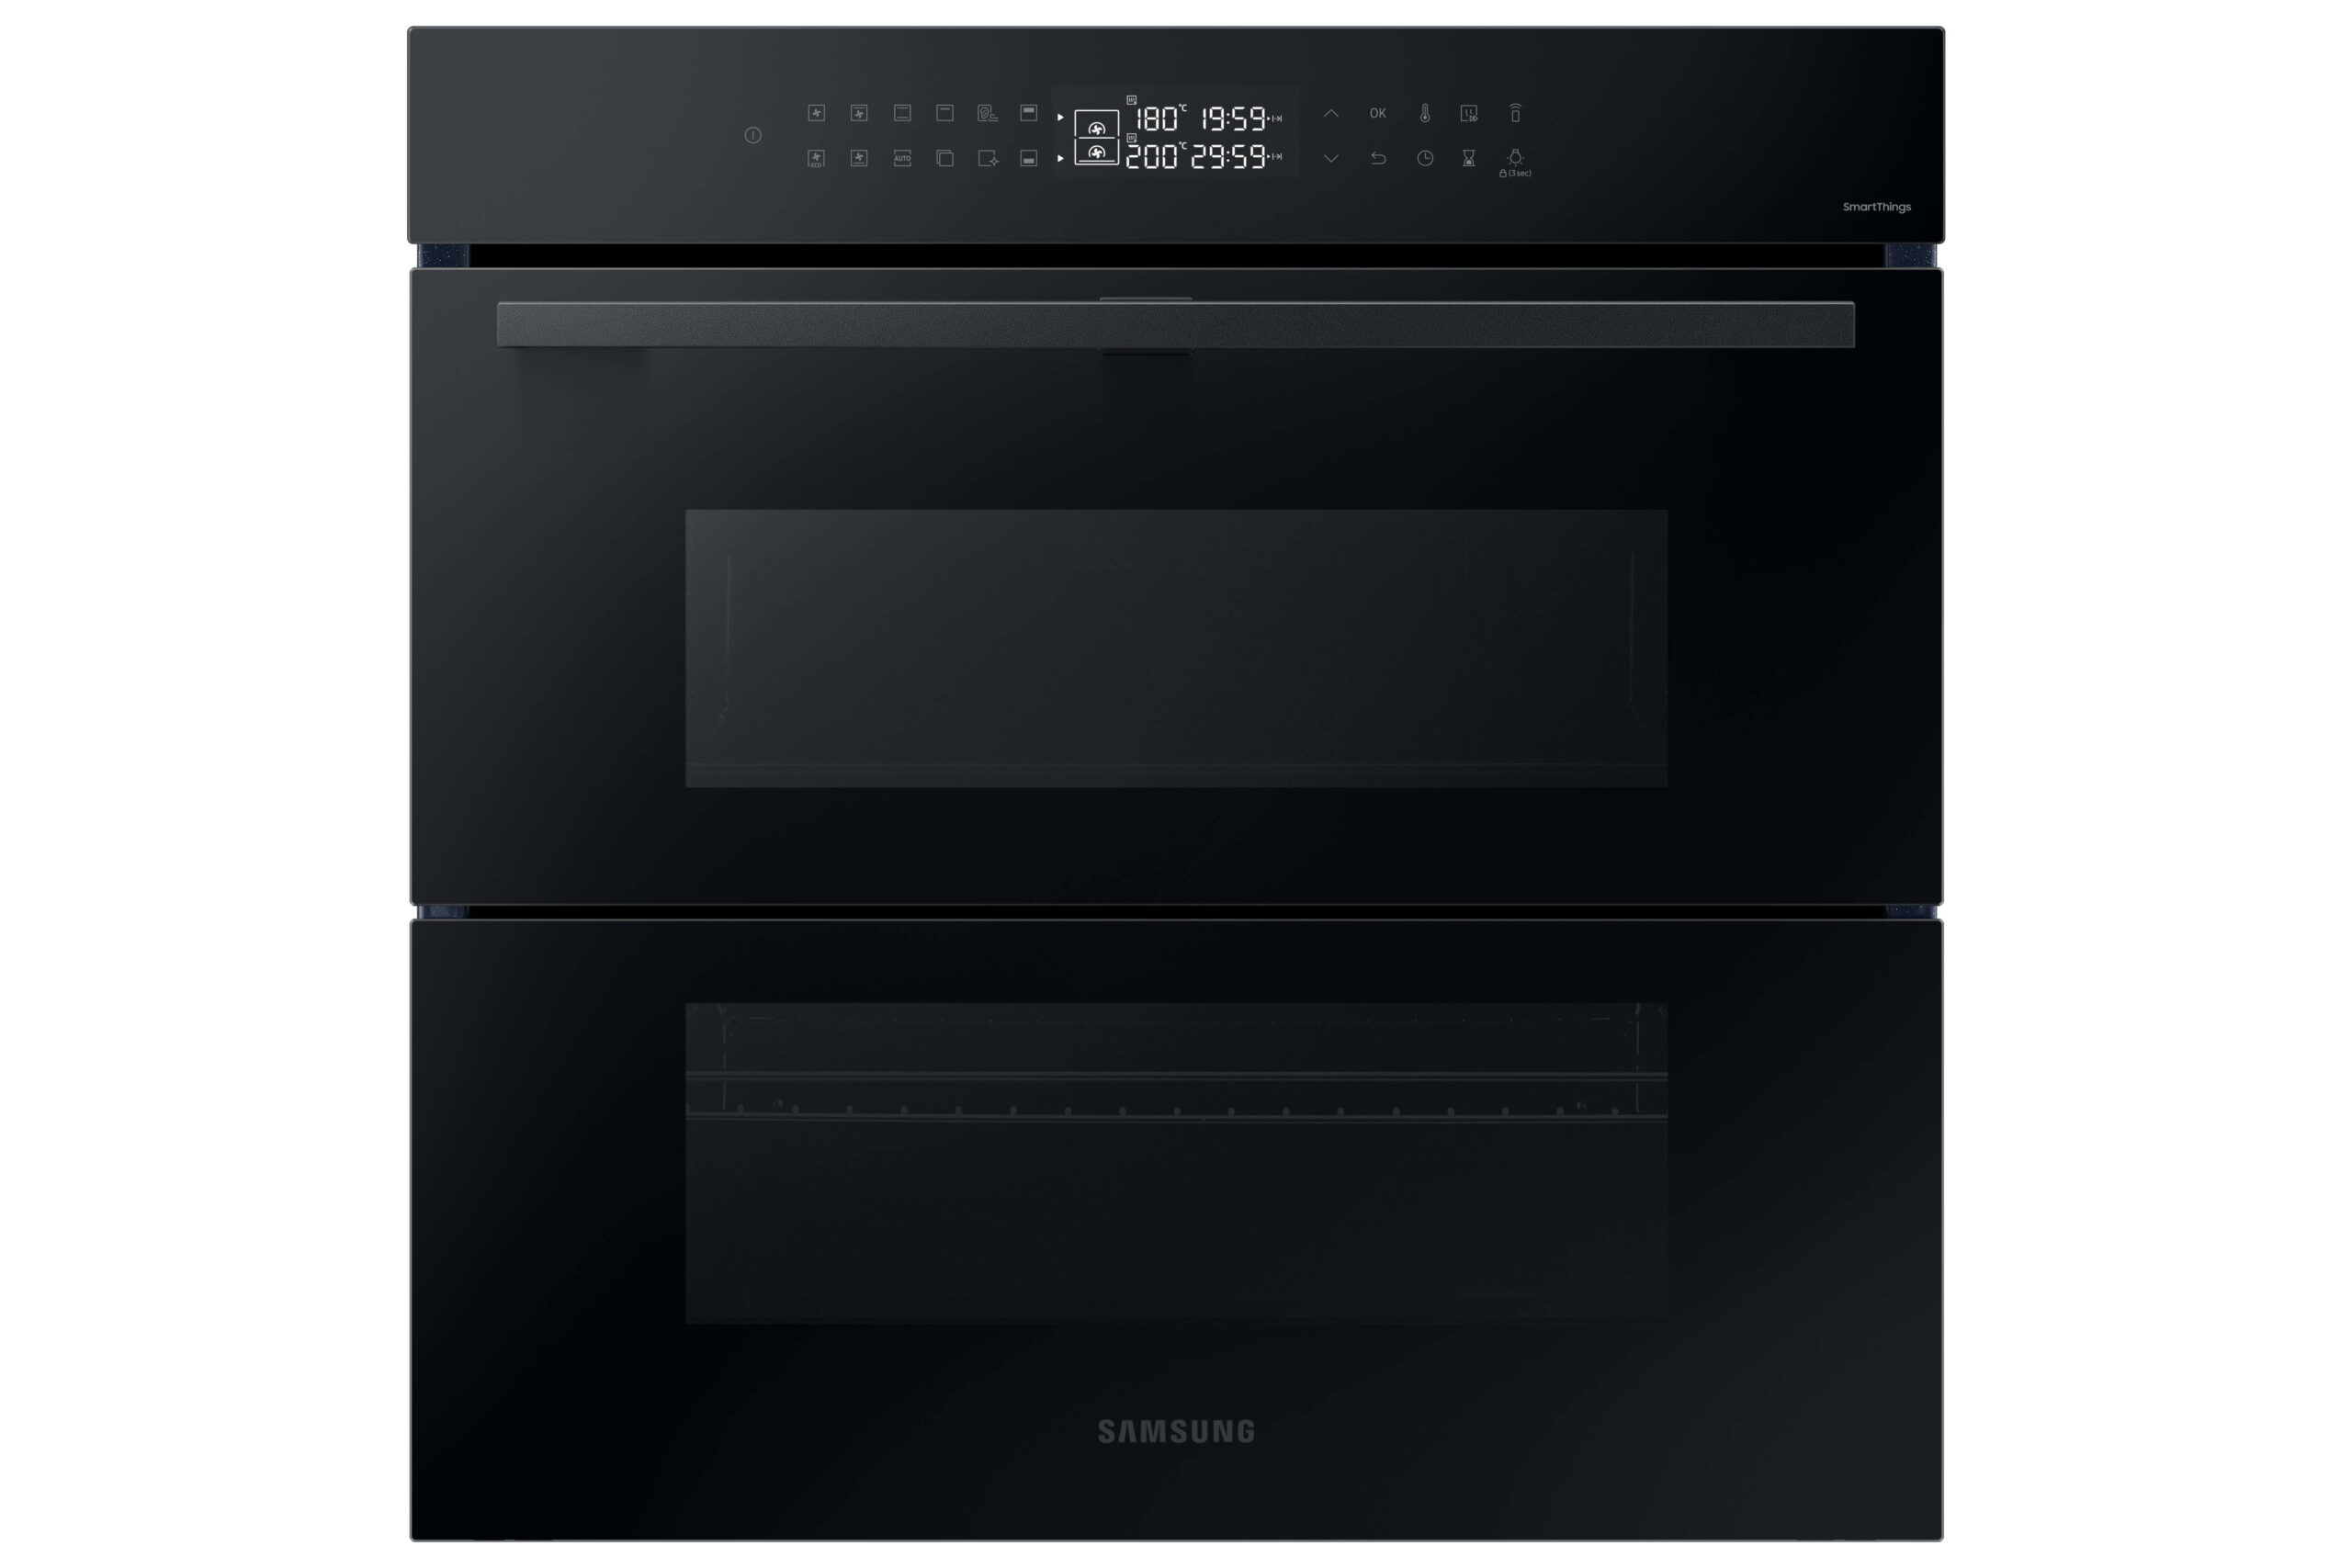 New Samsung oven range offers steam air fry and air sous vide cooking